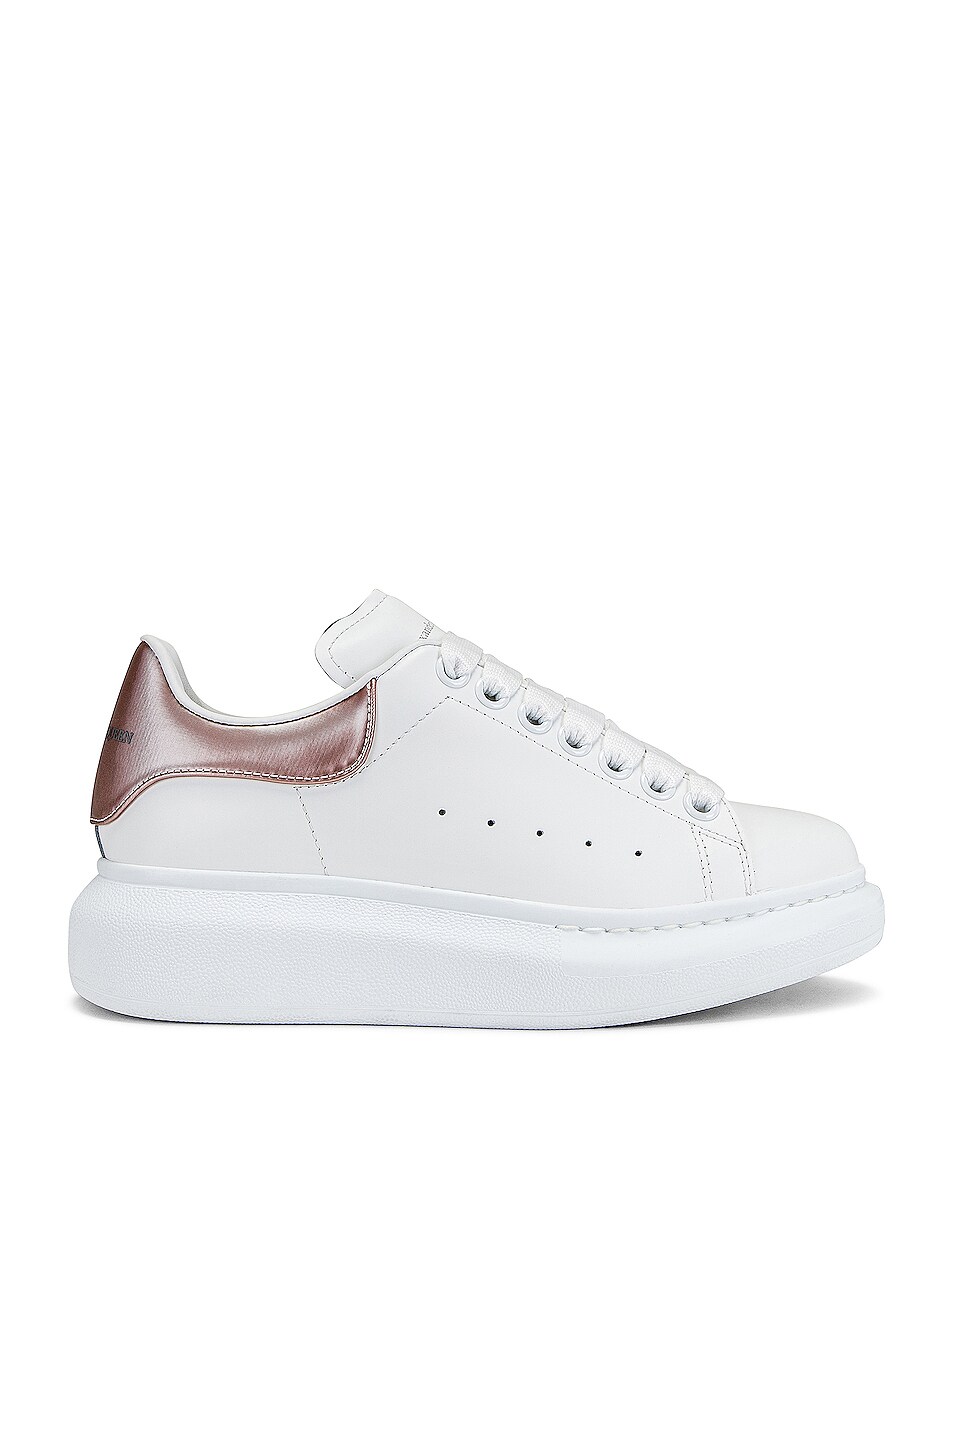 Image 1 of Alexander McQueen Oversized Sneakers in White & Stone